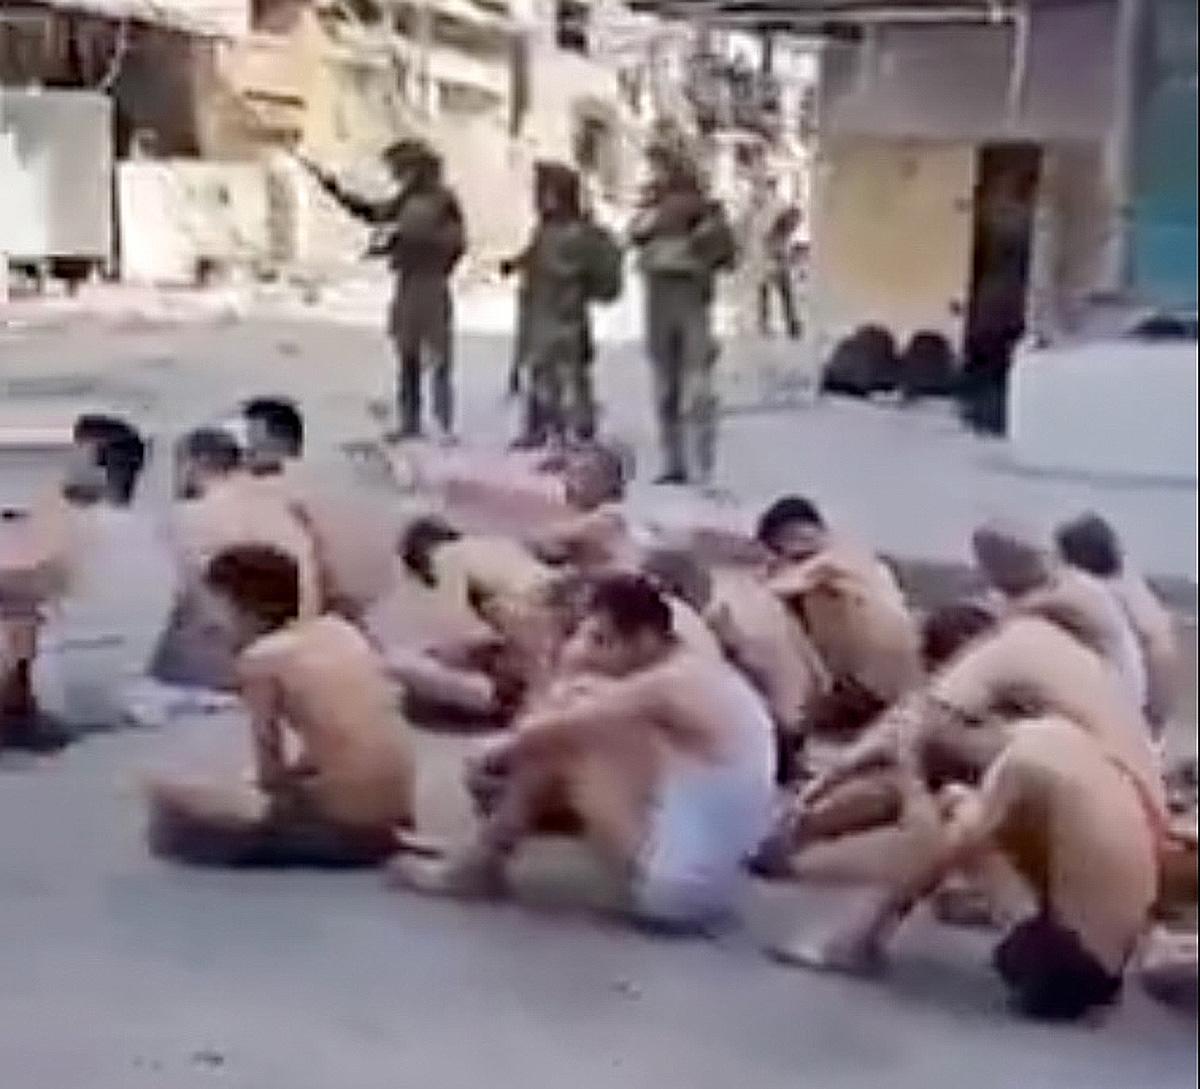 Israeli soldiers guard Gaza prisoners who have been stripped to their underwear.